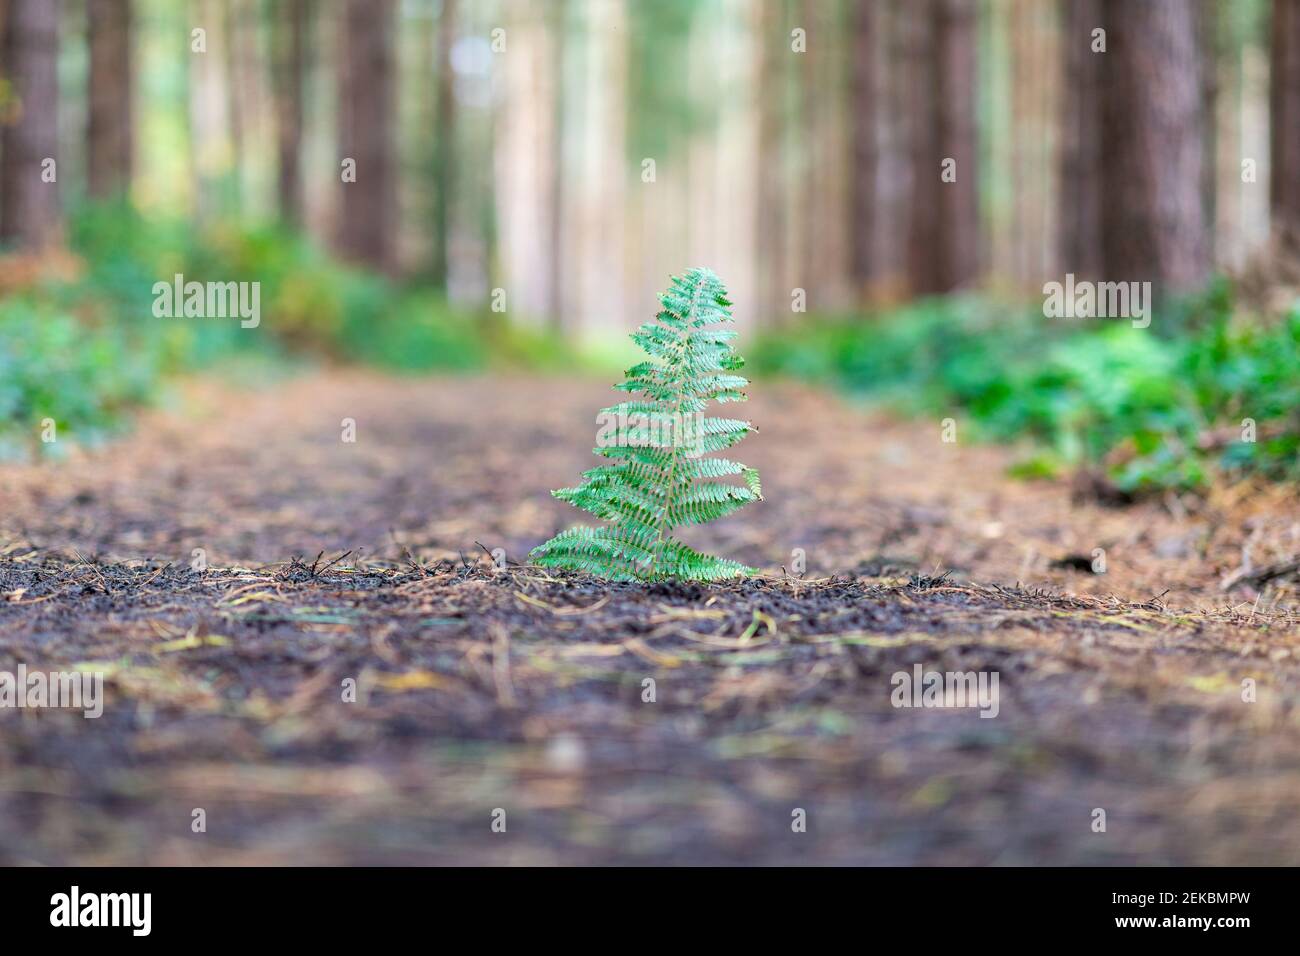 Close-up of plant growing on land in forest, Cannock Chase, UK Stock Photo